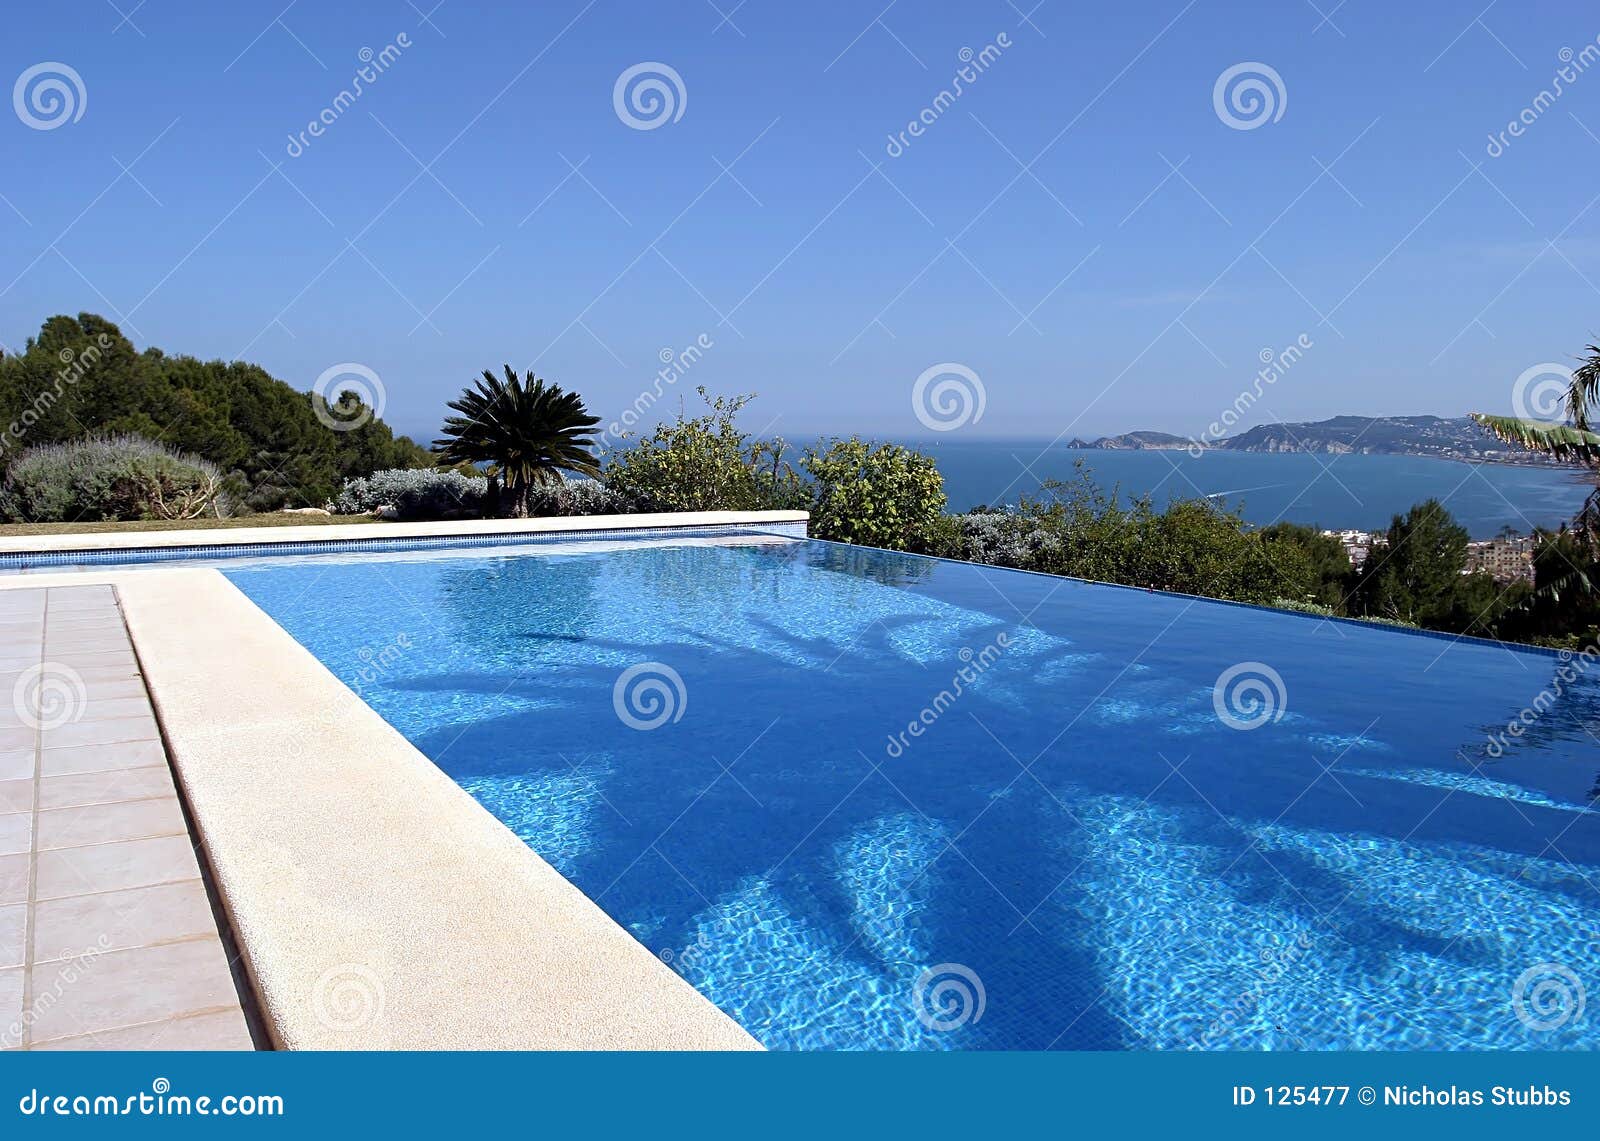 beautiful blue fresh infinity swimming pool in a villa in sunny spain with sea views